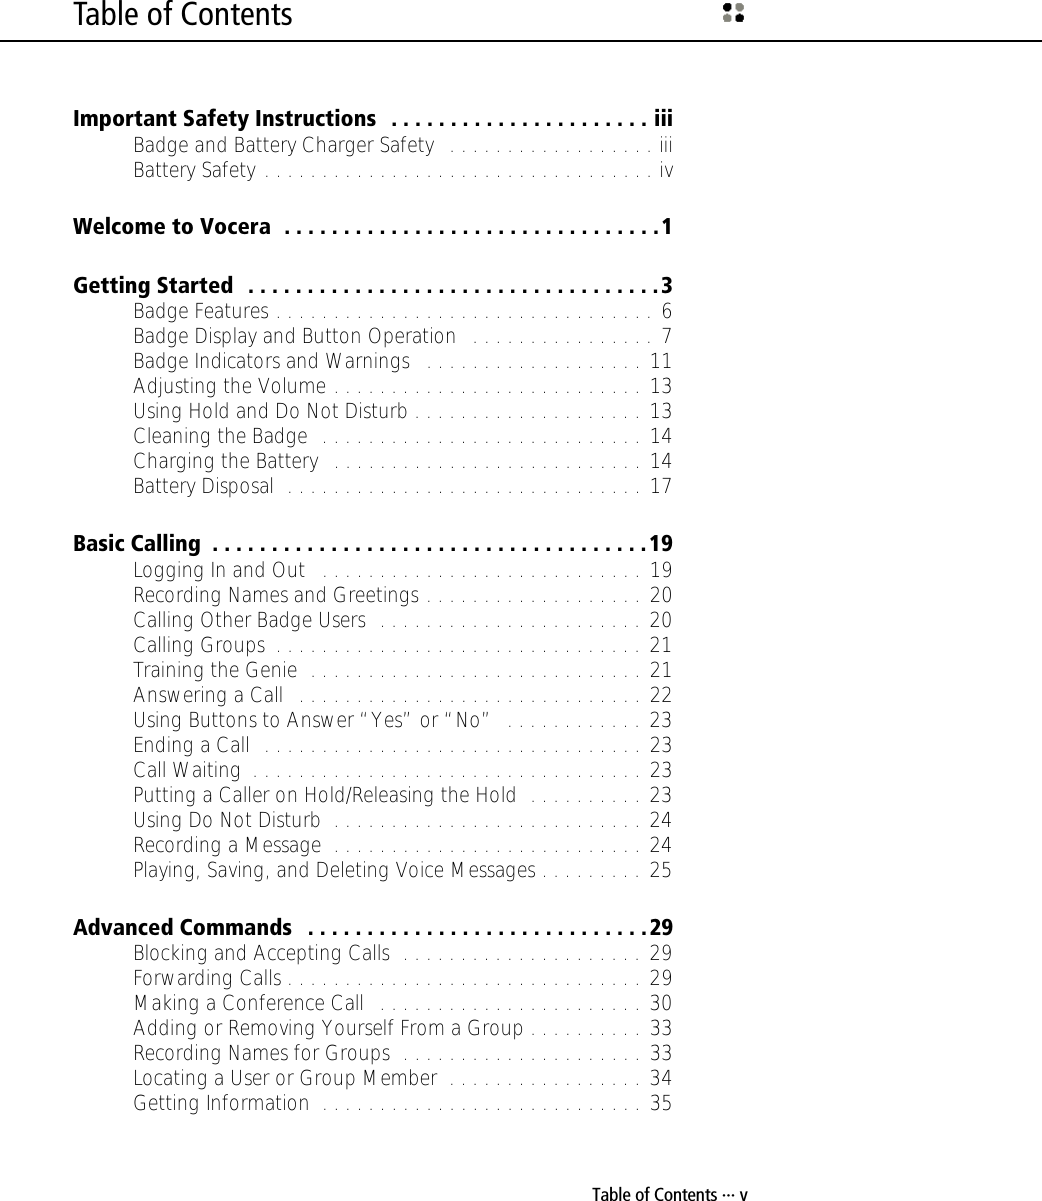 Table of Contents ··· vTable of ContentsImportant Safety Instructions   . . . . . . . . . . . . . . . . . . . . . . iiiBadge and Battery Charger Safety   . . . . . . . . . . . . . . . . . . iiiBattery Safety . . . . . . . . . . . . . . . . . . . . . . . . . . . . . . . . . . ivWelcome to Vocera  . . . . . . . . . . . . . . . . . . . . . . . . . . . . . . . .1Getting Started  . . . . . . . . . . . . . . . . . . . . . . . . . . . . . . . . . . .3Badge Features . . . . . . . . . . . . . . . . . . . . . . . . . . . . . . . . . 6Badge Display and Button Operation   . . . . . . . . . . . . . . . . 7Badge Indicators and Warnings   . . . . . . . . . . . . . . . . . . . 11Adjusting the Volume . . . . . . . . . . . . . . . . . . . . . . . . . . . 13Using Hold and Do Not Disturb . . . . . . . . . . . . . . . . . . . . 13Cleaning the Badge  . . . . . . . . . . . . . . . . . . . . . . . . . . . . 14Charging the Battery   . . . . . . . . . . . . . . . . . . . . . . . . . . . 14Battery Disposal  . . . . . . . . . . . . . . . . . . . . . . . . . . . . . . . 17Basic Calling  . . . . . . . . . . . . . . . . . . . . . . . . . . . . . . . . . . . . .19Logging In and Out   . . . . . . . . . . . . . . . . . . . . . . . . . . . . 19Recording Names and Greetings . . . . . . . . . . . . . . . . . . . 20Calling Other Badge Users  . . . . . . . . . . . . . . . . . . . . . . . 20Calling Groups  . . . . . . . . . . . . . . . . . . . . . . . . . . . . . . . . 21Training the Genie  . . . . . . . . . . . . . . . . . . . . . . . . . . . . . 21Answering a Call   . . . . . . . . . . . . . . . . . . . . . . . . . . . . . . 22Using Buttons to Answer “Yes” or “No”  . . . . . . . . . . . . 23Ending a Call  . . . . . . . . . . . . . . . . . . . . . . . . . . . . . . . . . 23Call Waiting  . . . . . . . . . . . . . . . . . . . . . . . . . . . . . . . . . . 23Putting a Caller on Hold/Releasing the Hold  . . . . . . . . . . 23Using Do Not Disturb  . . . . . . . . . . . . . . . . . . . . . . . . . . . 24Recording a Message  . . . . . . . . . . . . . . . . . . . . . . . . . . . 24Playing, Saving, and Deleting Voice Messages . . . . . . . . . 25Advanced Commands   . . . . . . . . . . . . . . . . . . . . . . . . . . . . .29Blocking and Accepting Calls  . . . . . . . . . . . . . . . . . . . . . 29Forwarding Calls . . . . . . . . . . . . . . . . . . . . . . . . . . . . . . . 29Making a Conference Call   . . . . . . . . . . . . . . . . . . . . . . . 30Adding or Removing Yourself From a Group . . . . . . . . . . 33Recording Names for Groups  . . . . . . . . . . . . . . . . . . . . . 33Locating a User or Group Member  . . . . . . . . . . . . . . . . . 34Getting Information  . . . . . . . . . . . . . . . . . . . . . . . . . . . . 35